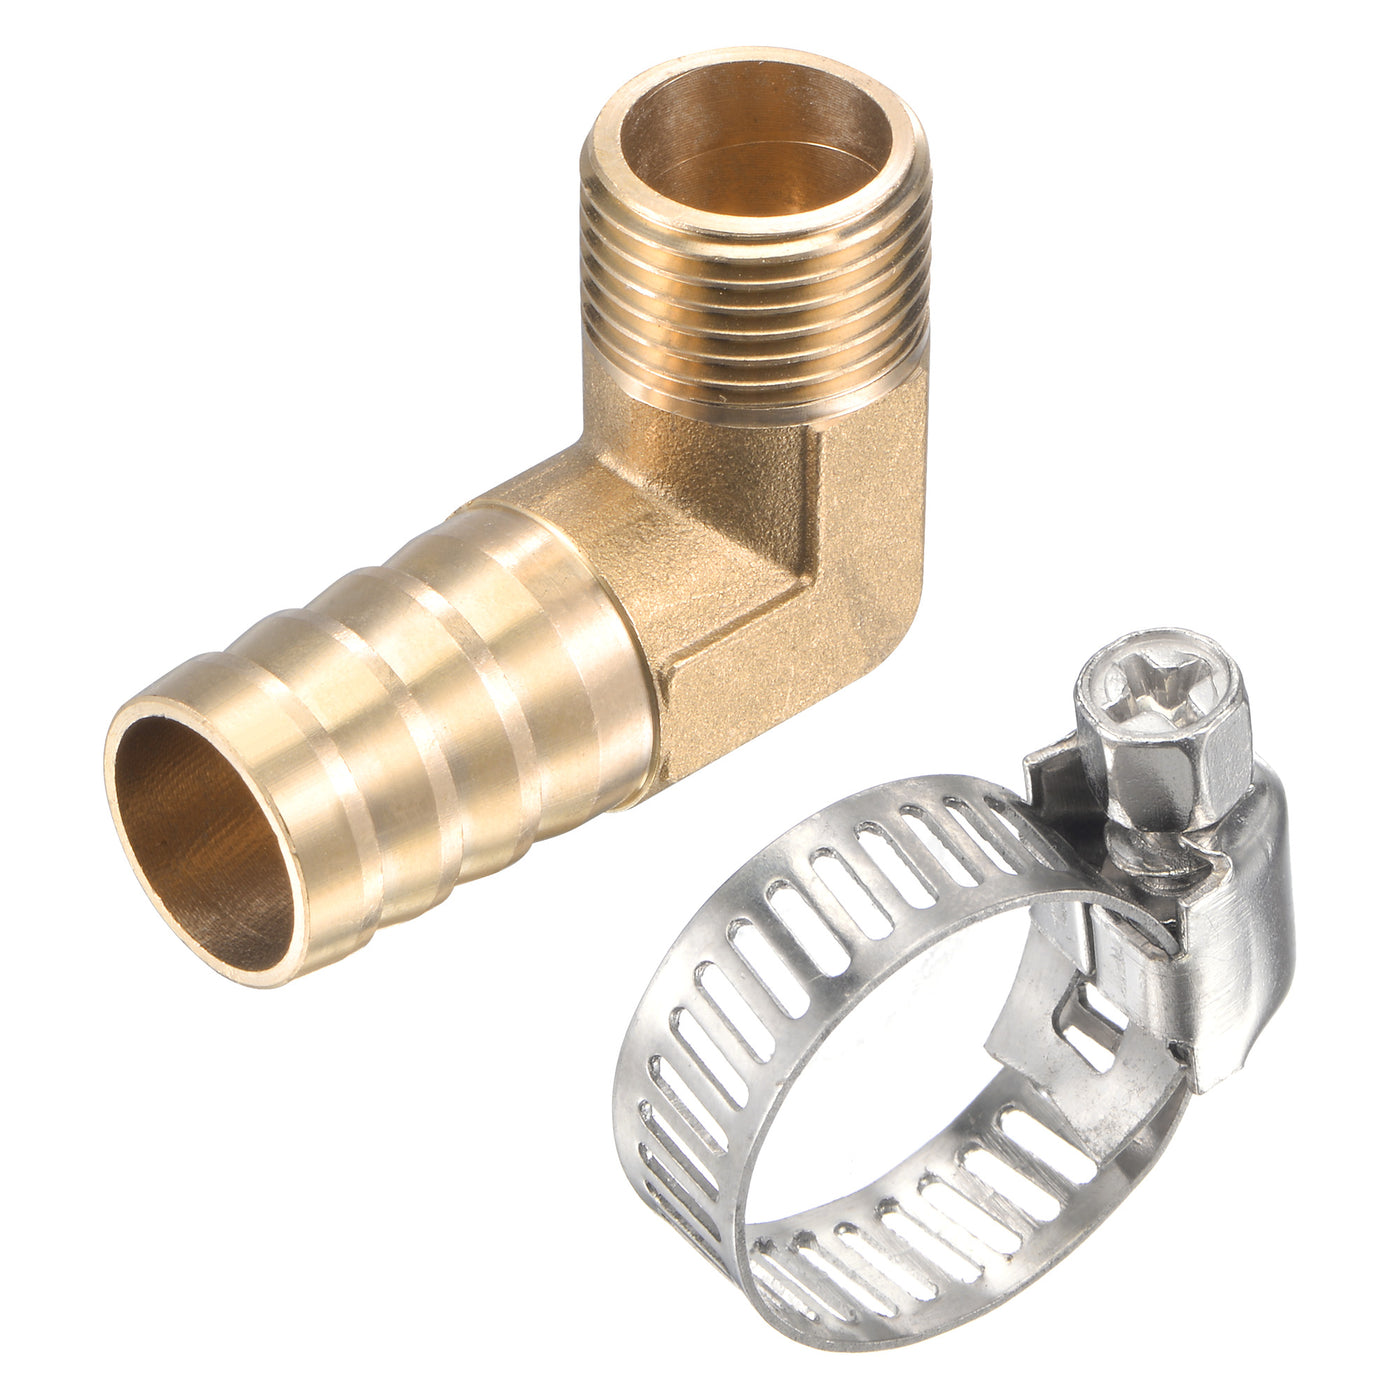 Uxcell Uxcell Brass Hose Barb Fitting Elbow 16mm x G1/2 Male Thread Right Angle Pipe Connector with Stainless Steel Hose Clamp